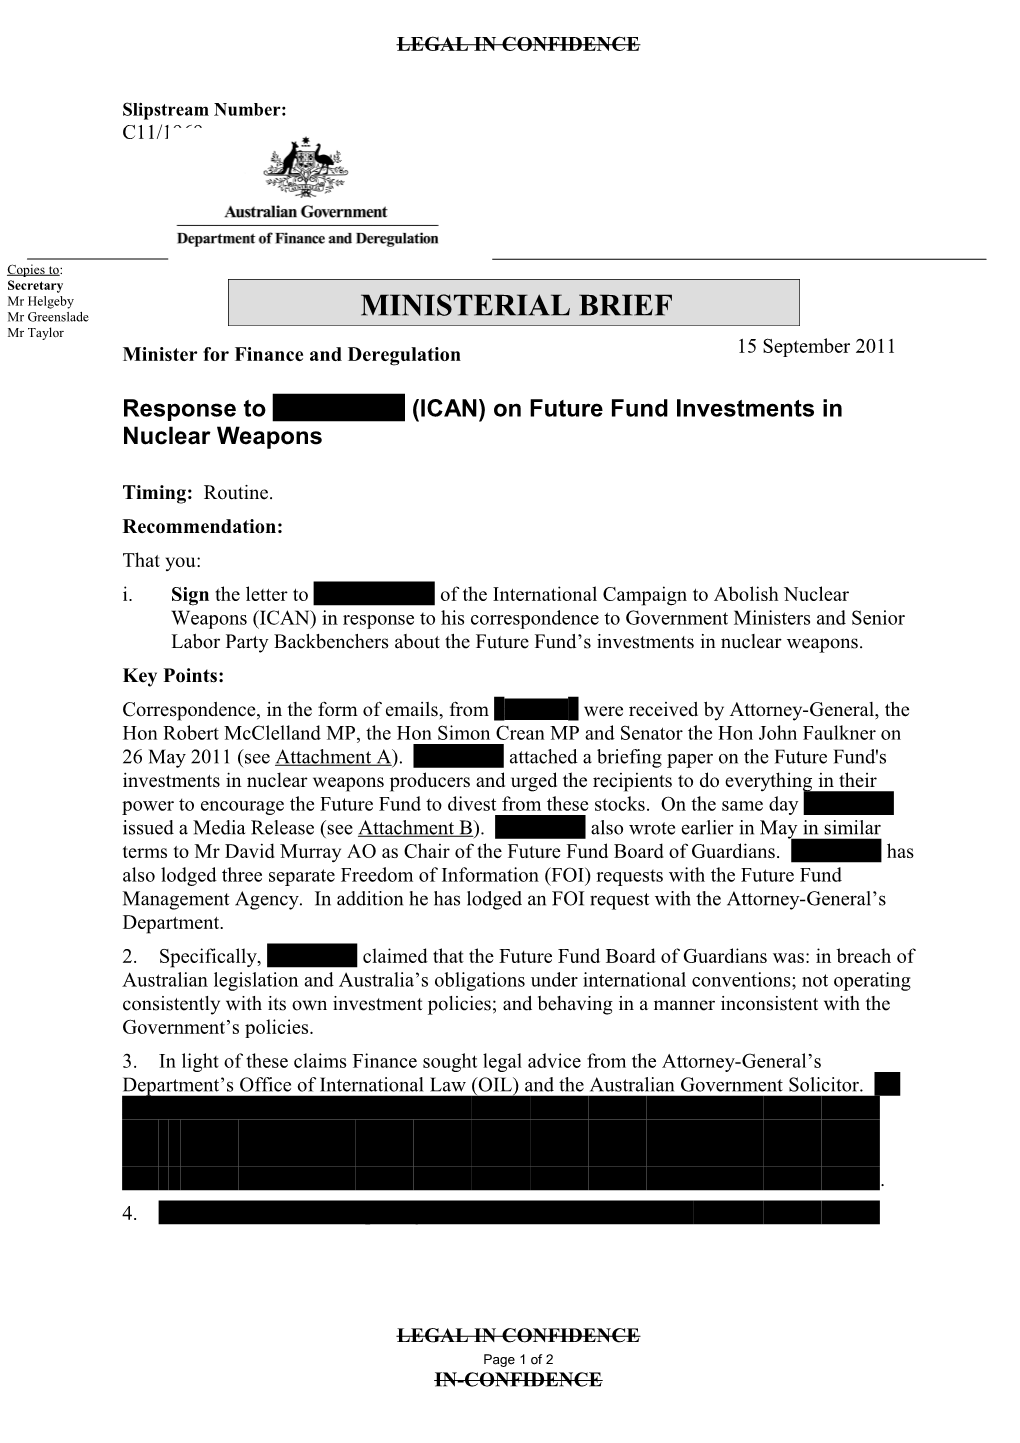 FOI 11-89 - Released Document 2 - Ministerial Brief Response to Correspondence